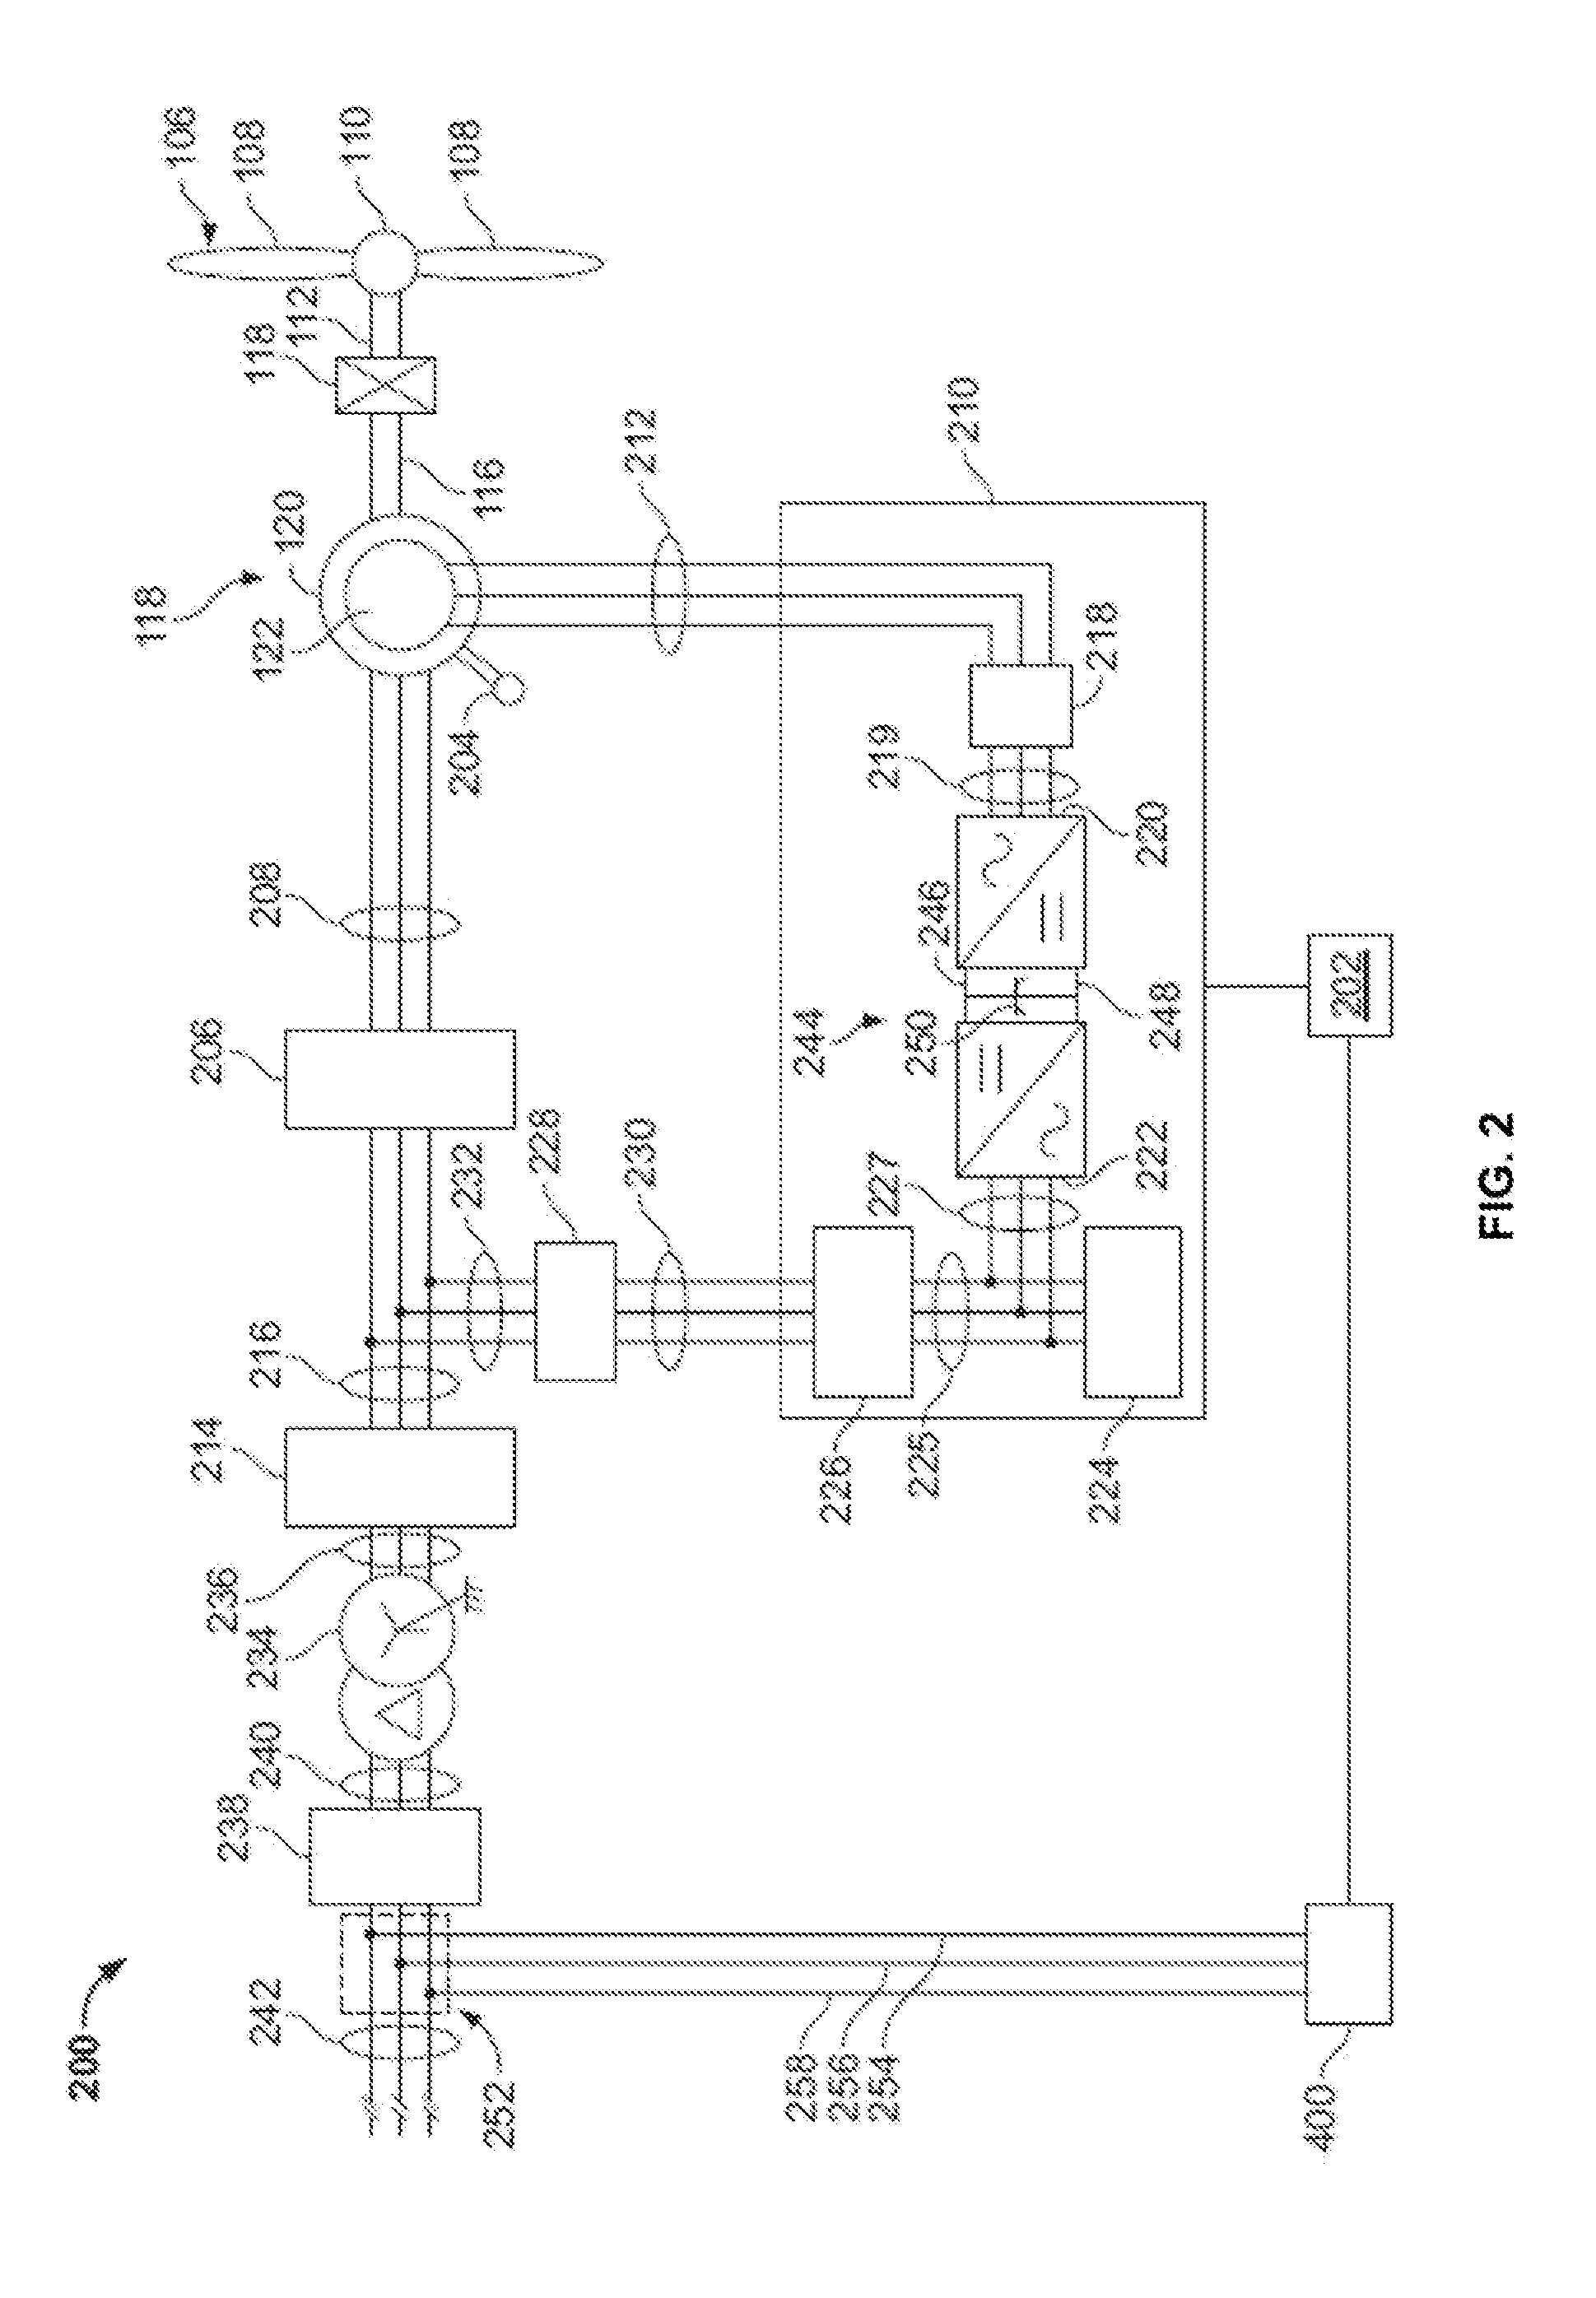 System and method for protecting electrical machines